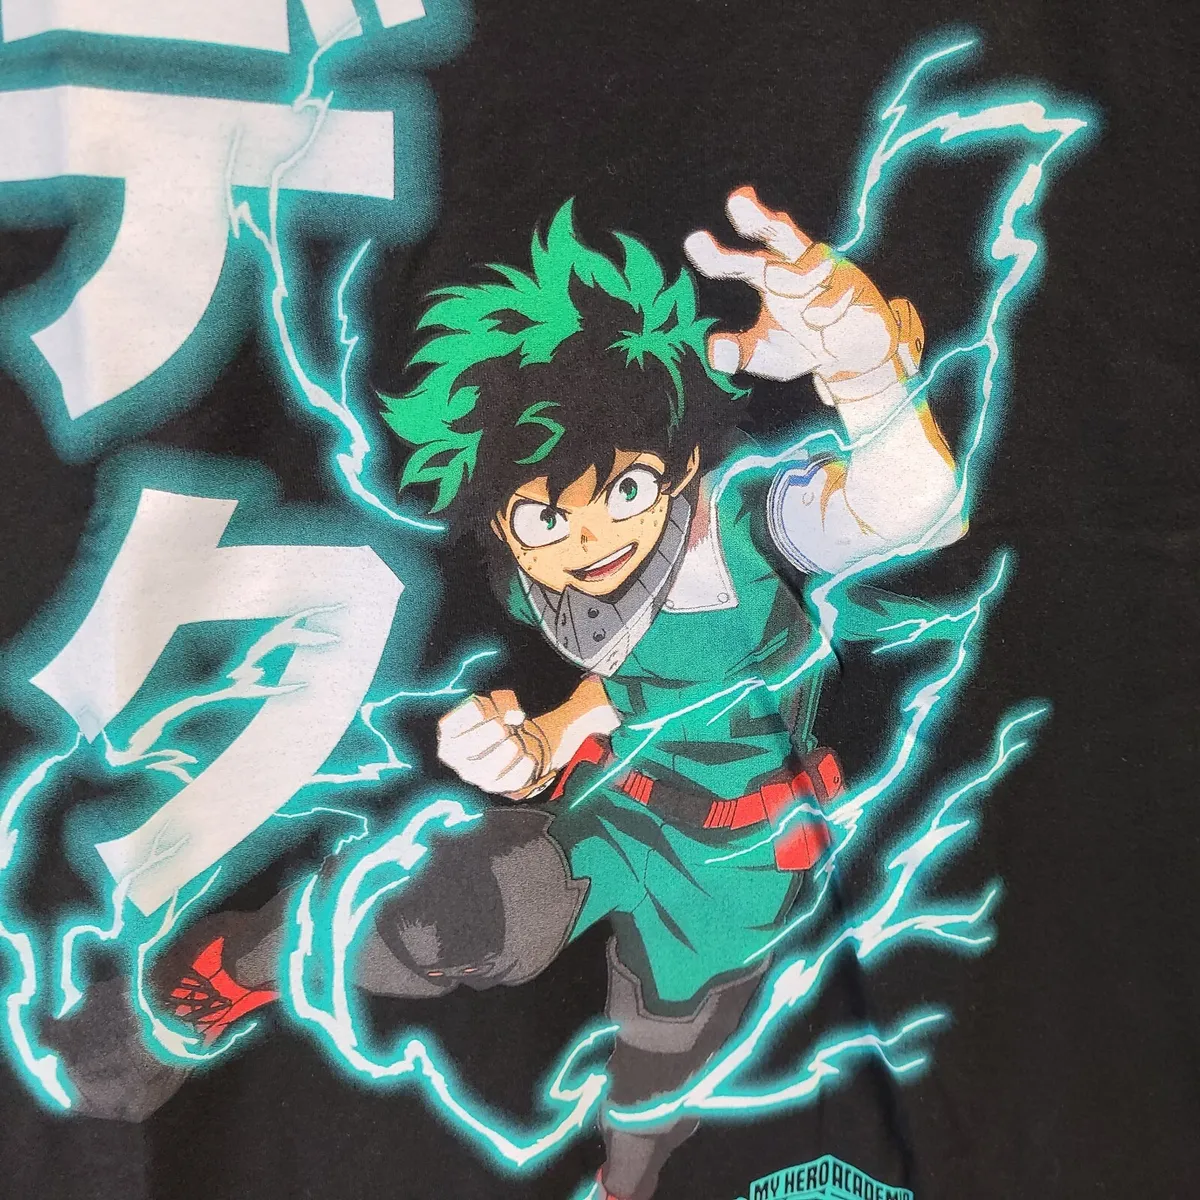 chris ketron recommends images of deku from my hero academia pic